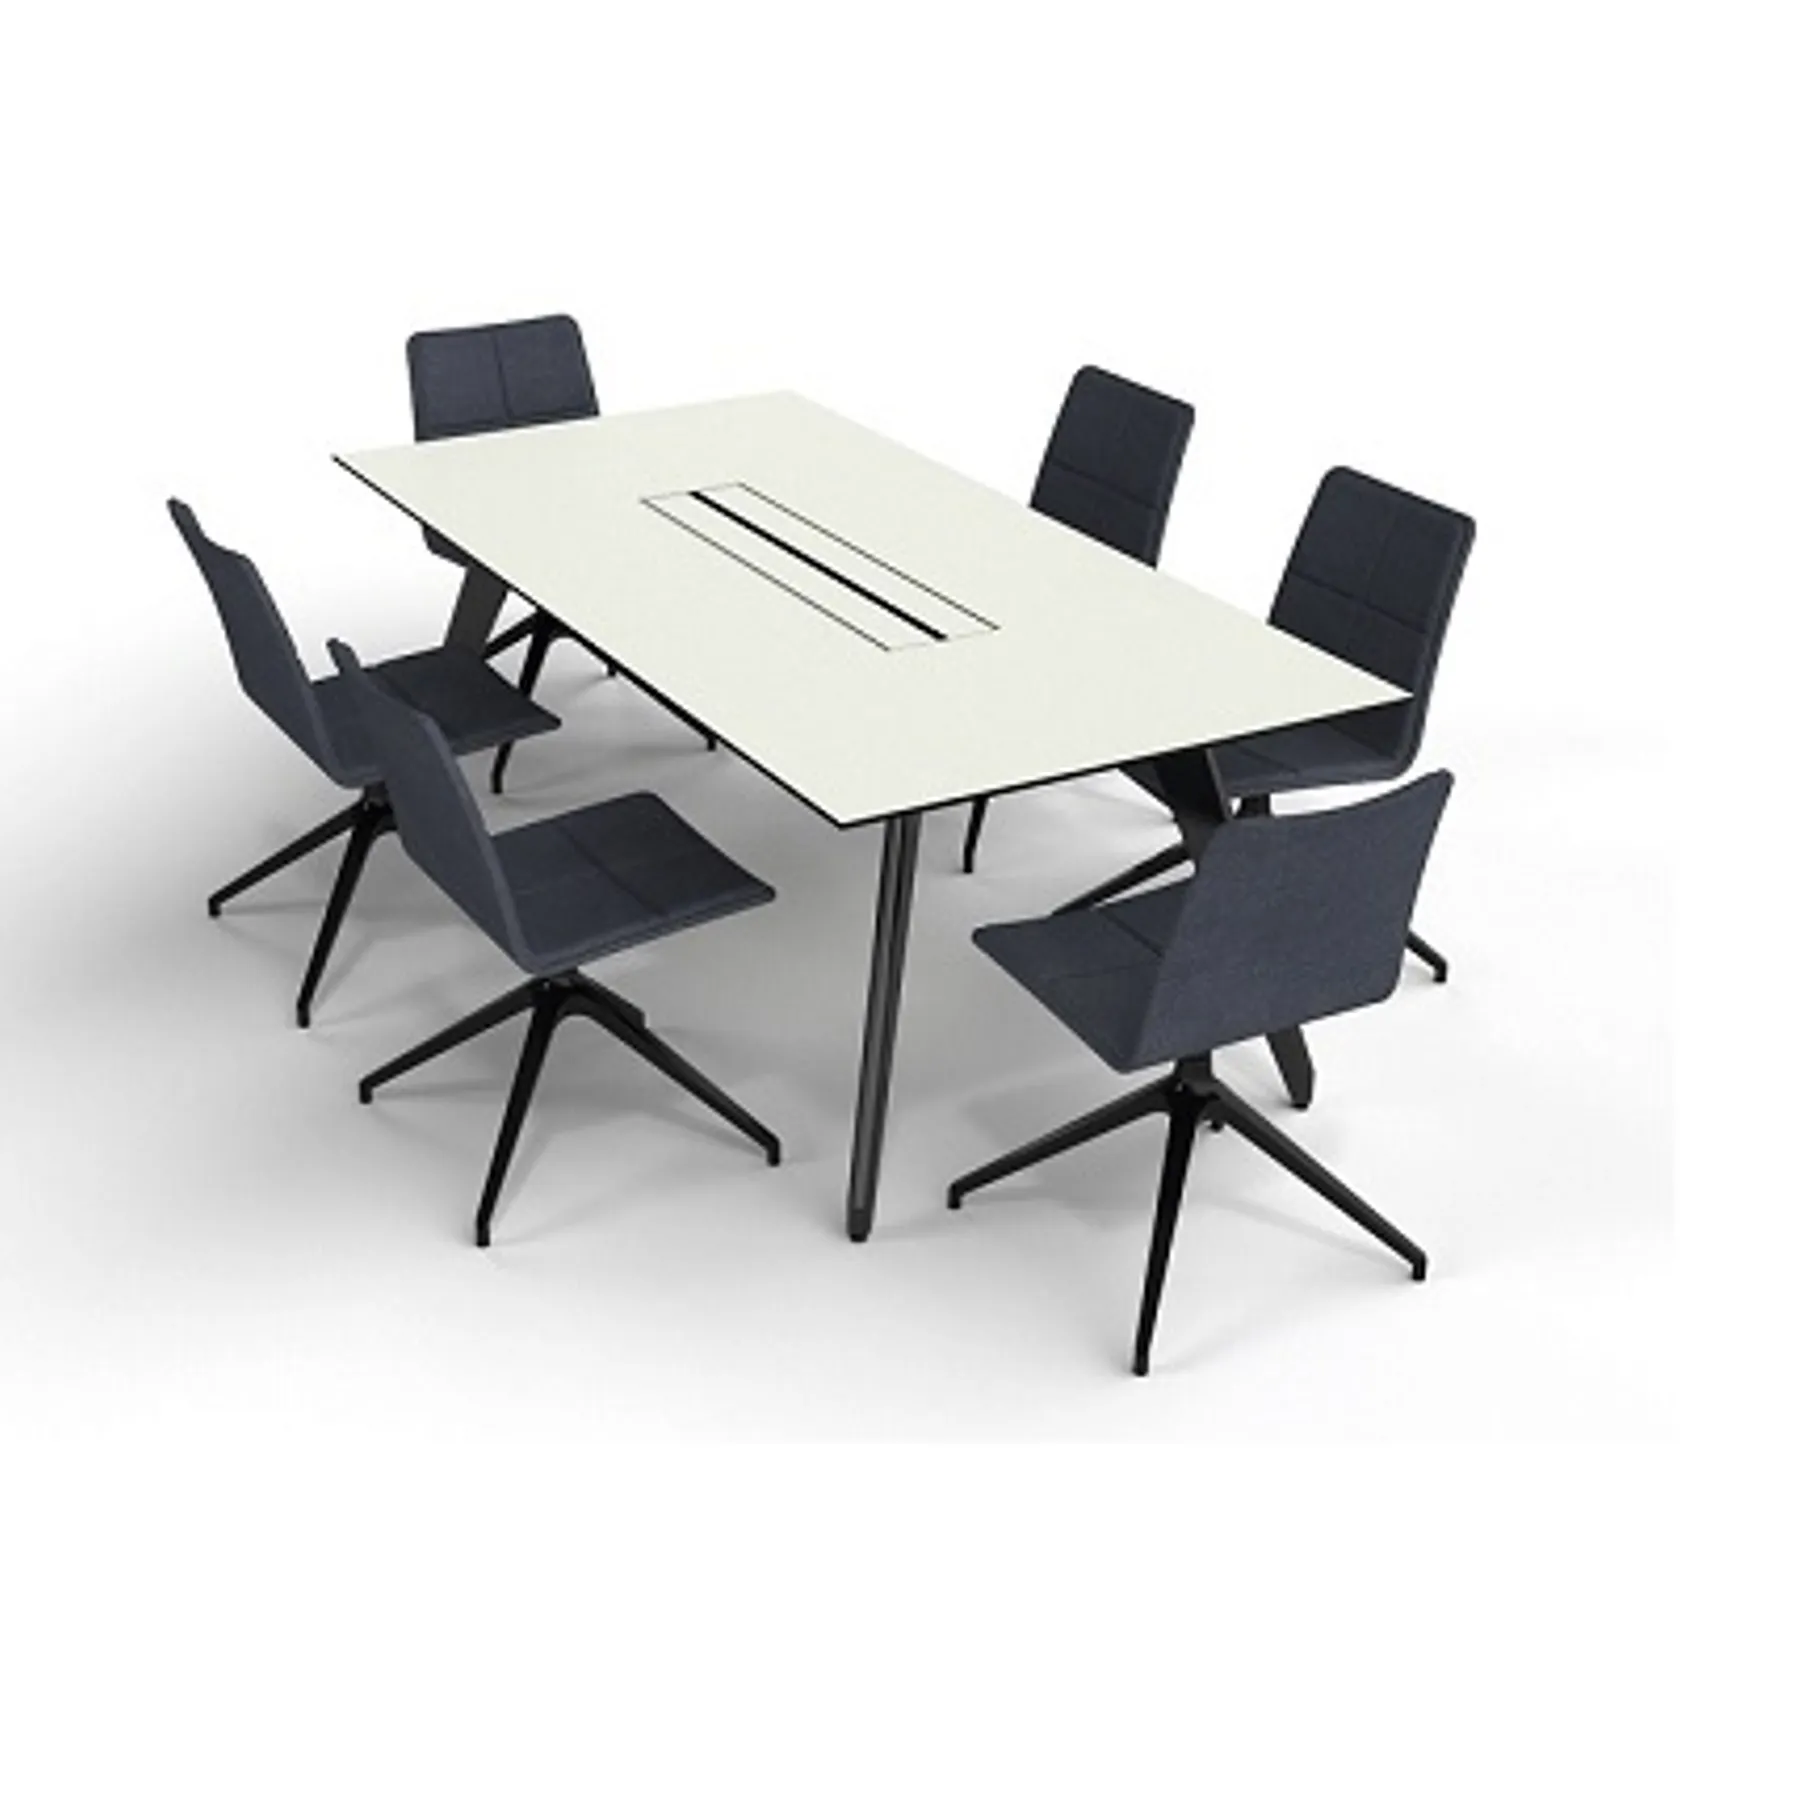 LOF Direct Sven Christiansen Ligni conference chair NC4 Roomset 1